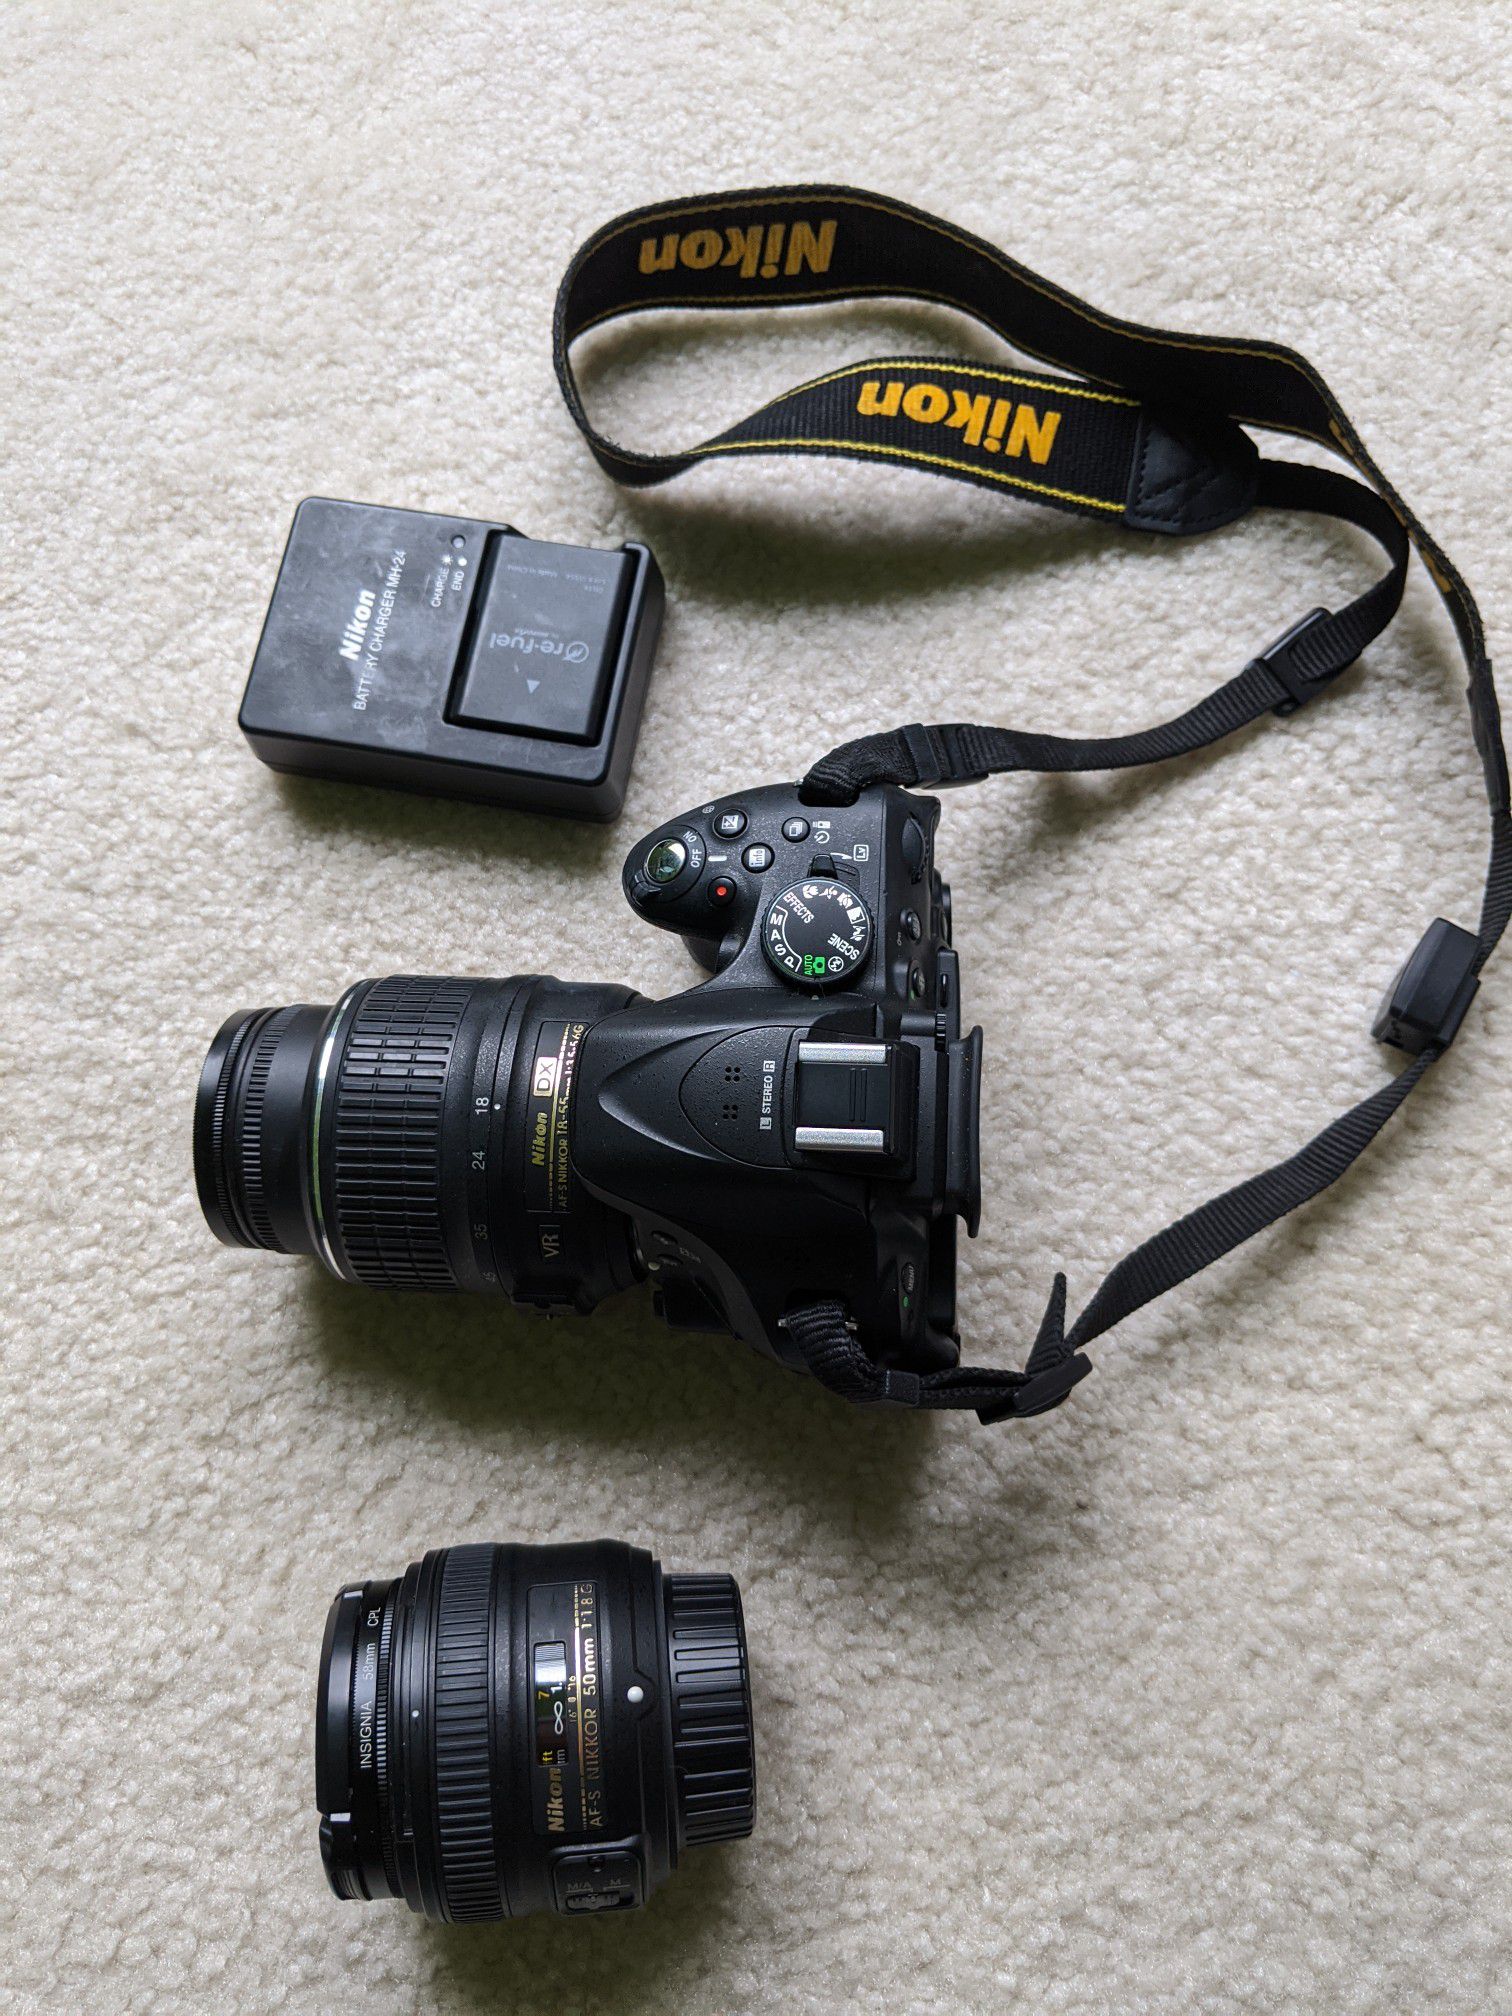 Nikon D5200 with 2 lenses 2 batteries and a bag